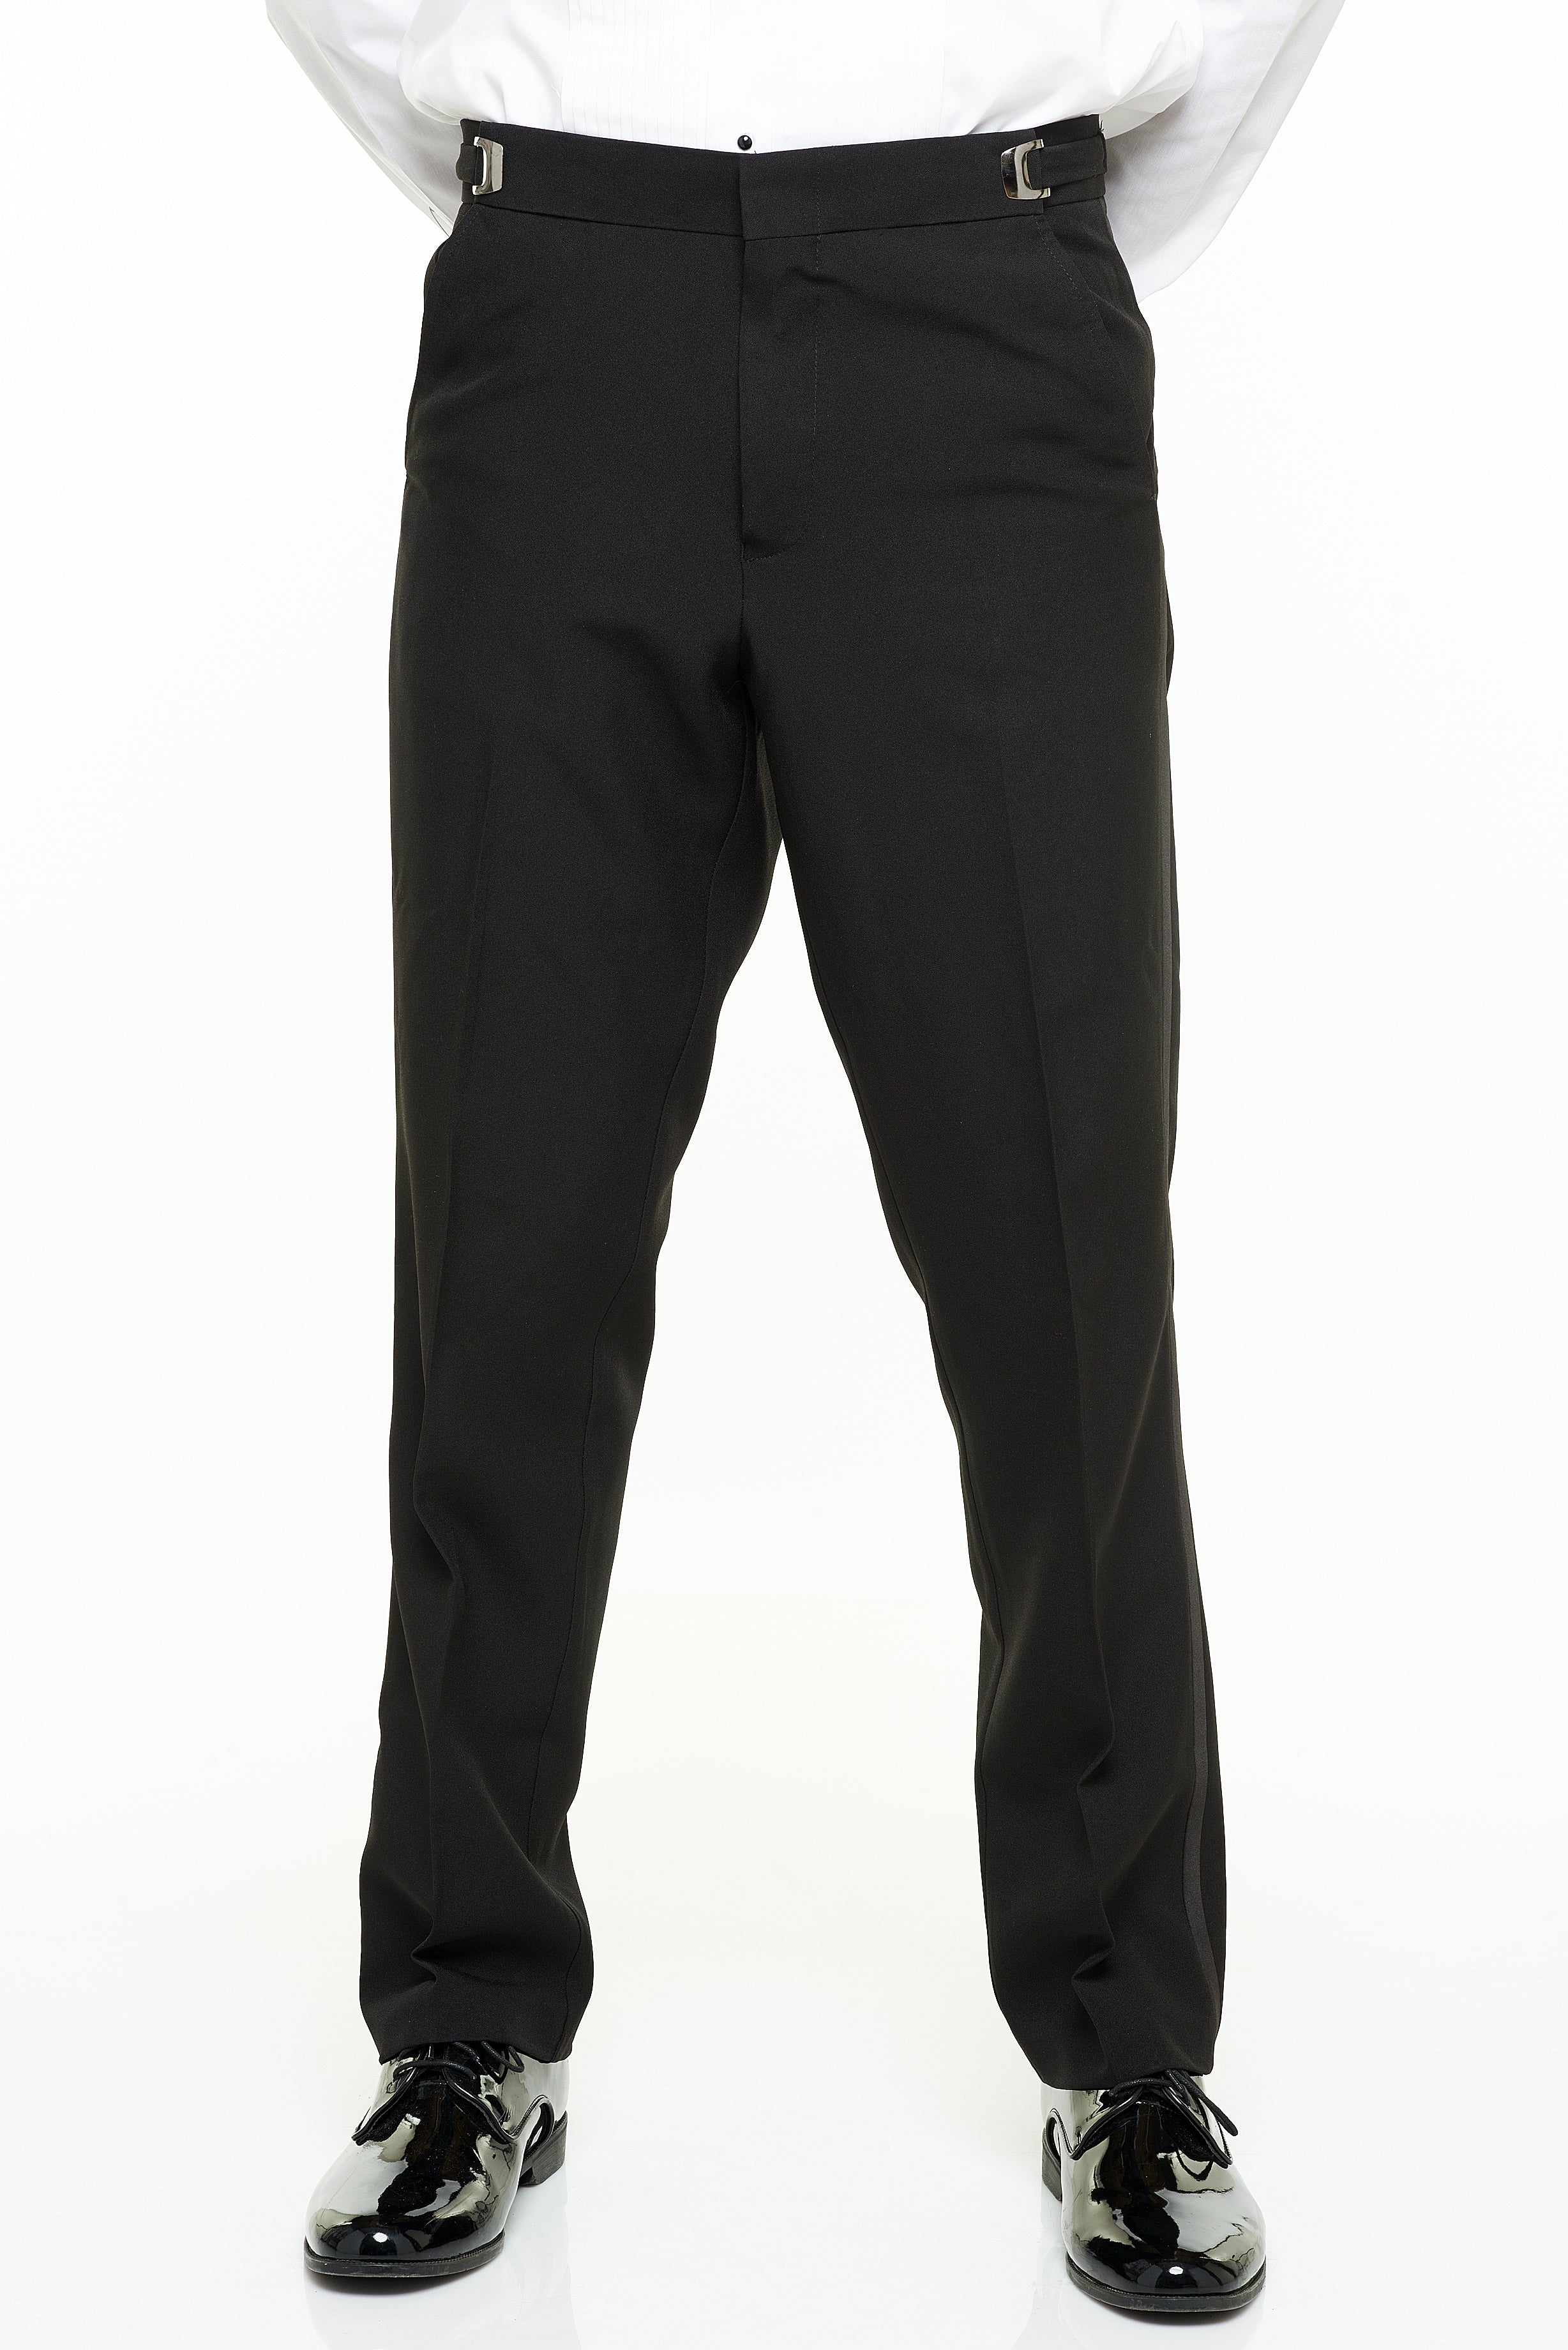 Buy STOP Textured Polyester Viscose Slim Fit Men's Trousers | Shoppers Stop